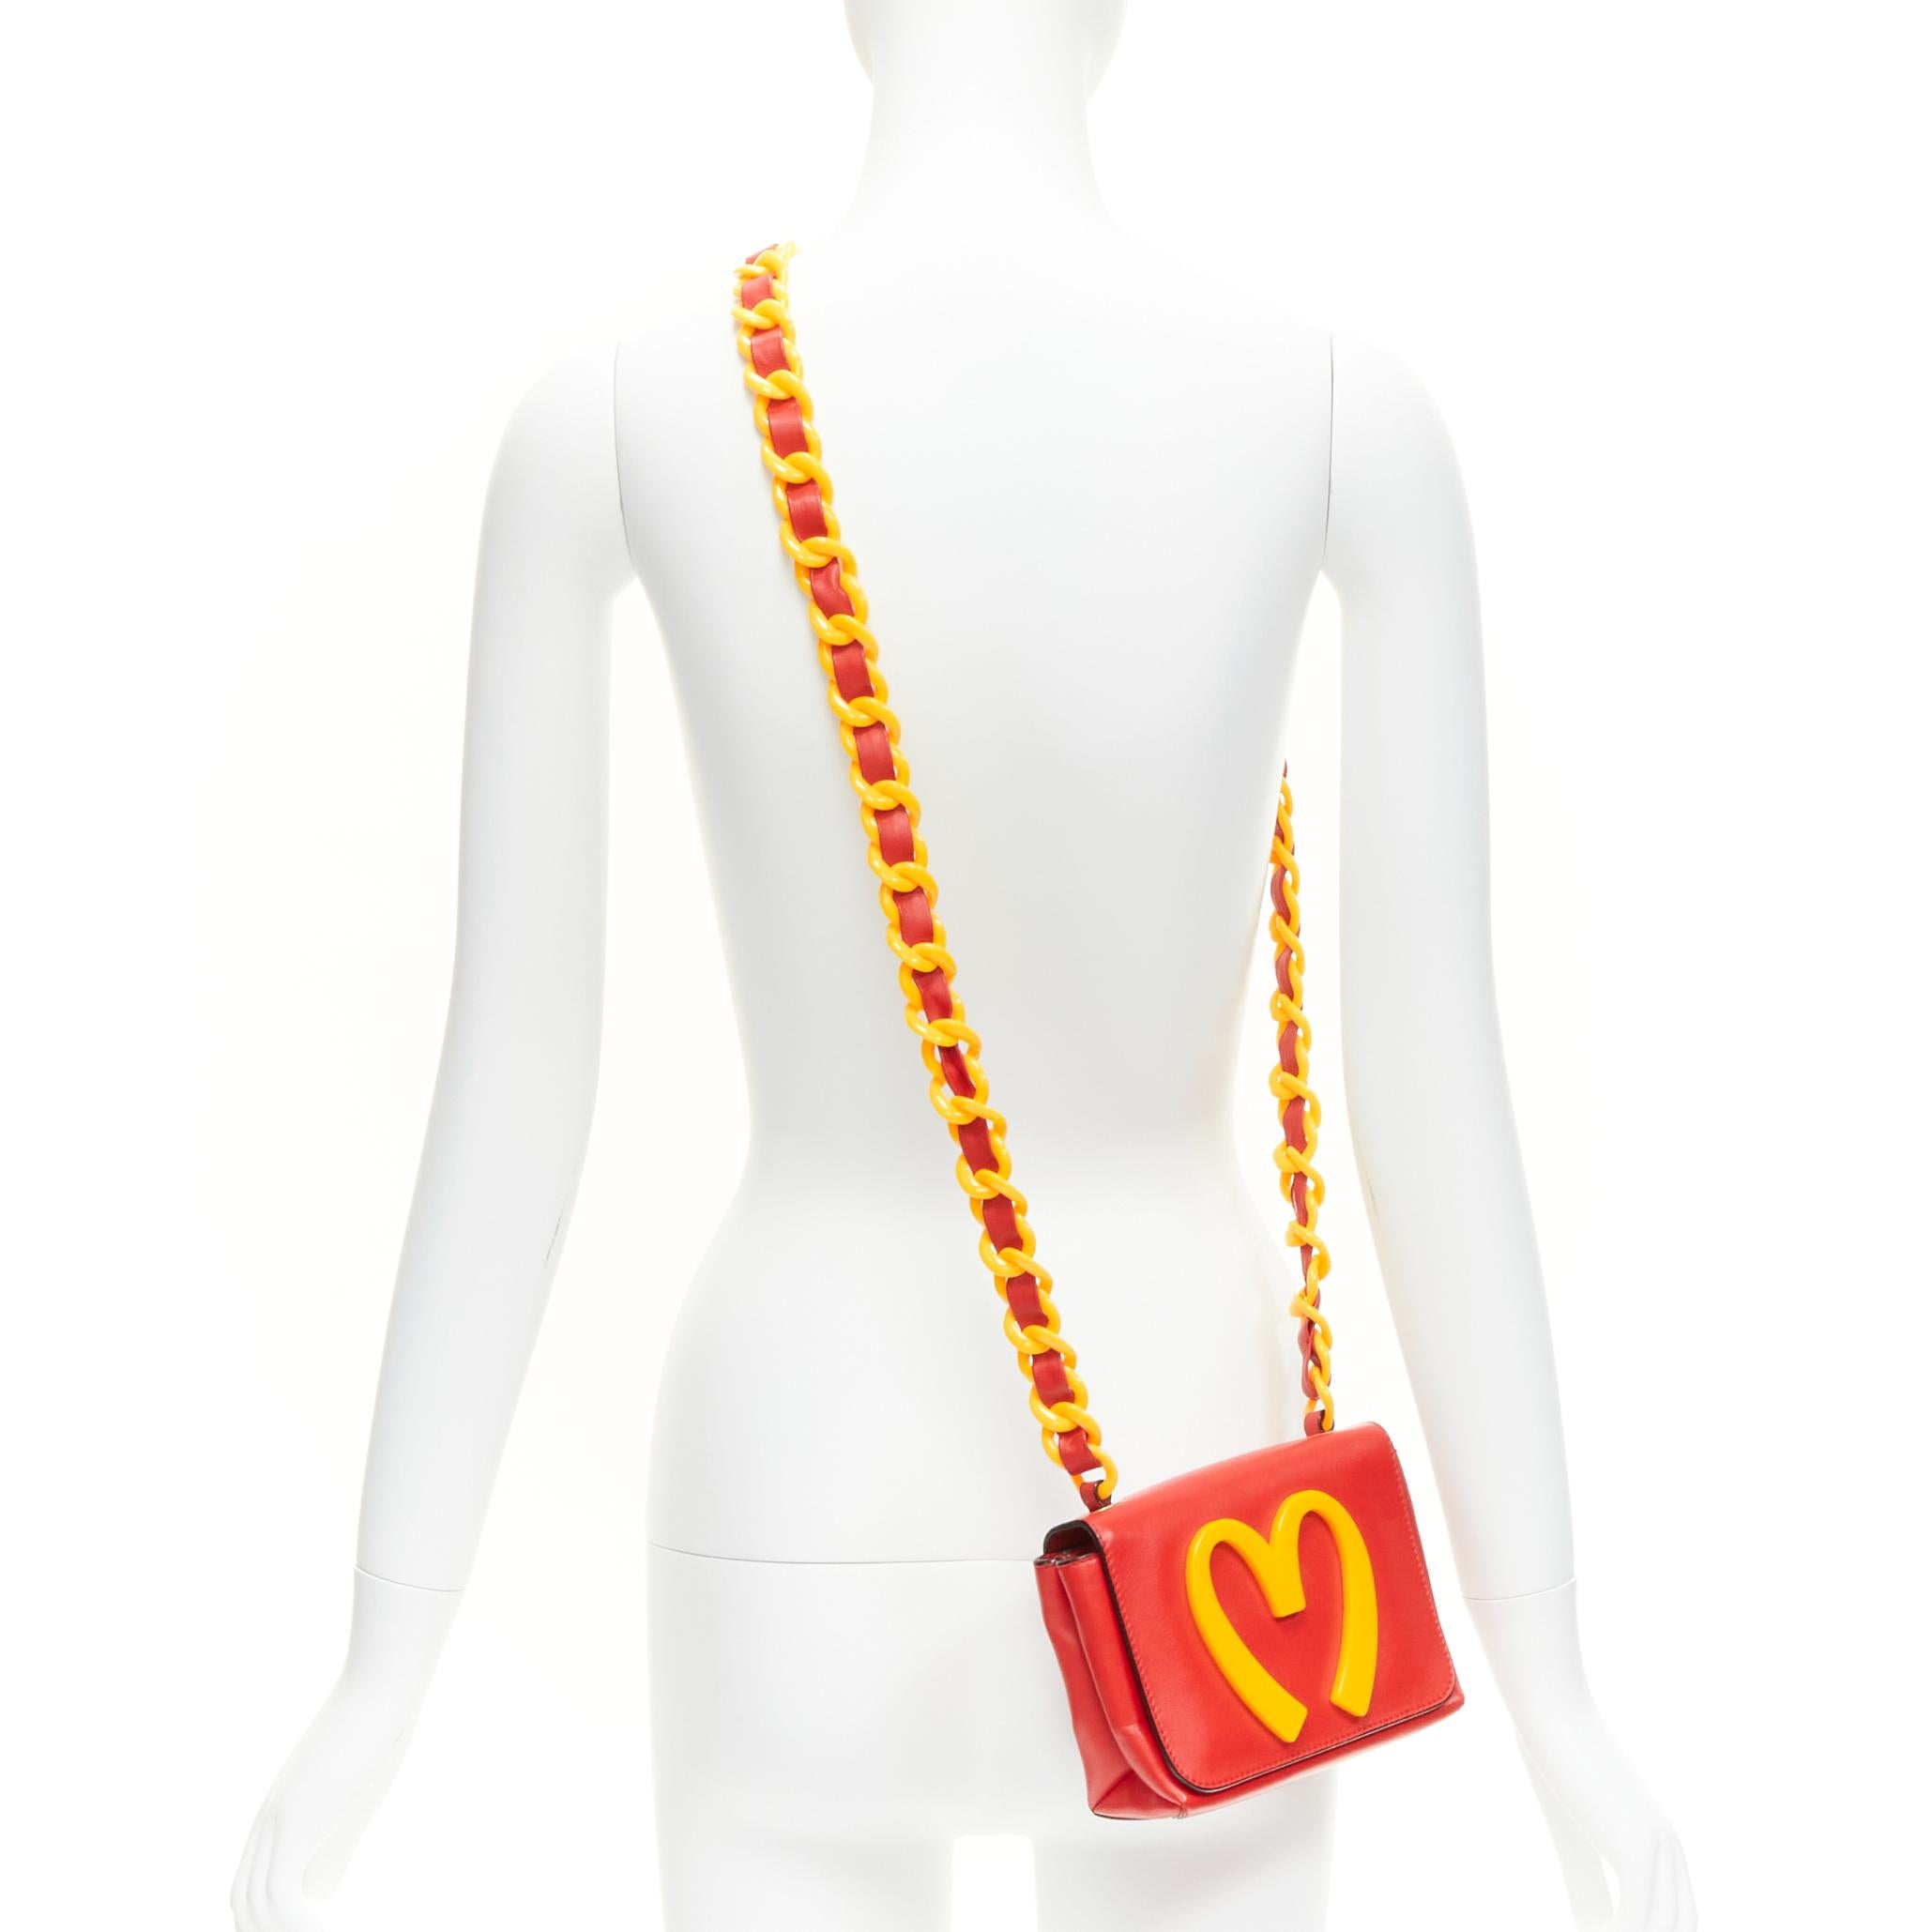 rare MOSCHINO Jeremy Scott 2014 red yellow plastic chain crossbody bag
Reference: LNKO/A02088
Brand: Moschino
Designer: Jeremy Scott
Collection: Mcdonald's 2014 - Runway
Material: Leather
Color: Red, Yellow
Pattern: Solid
Closure: Magnet
Lining: